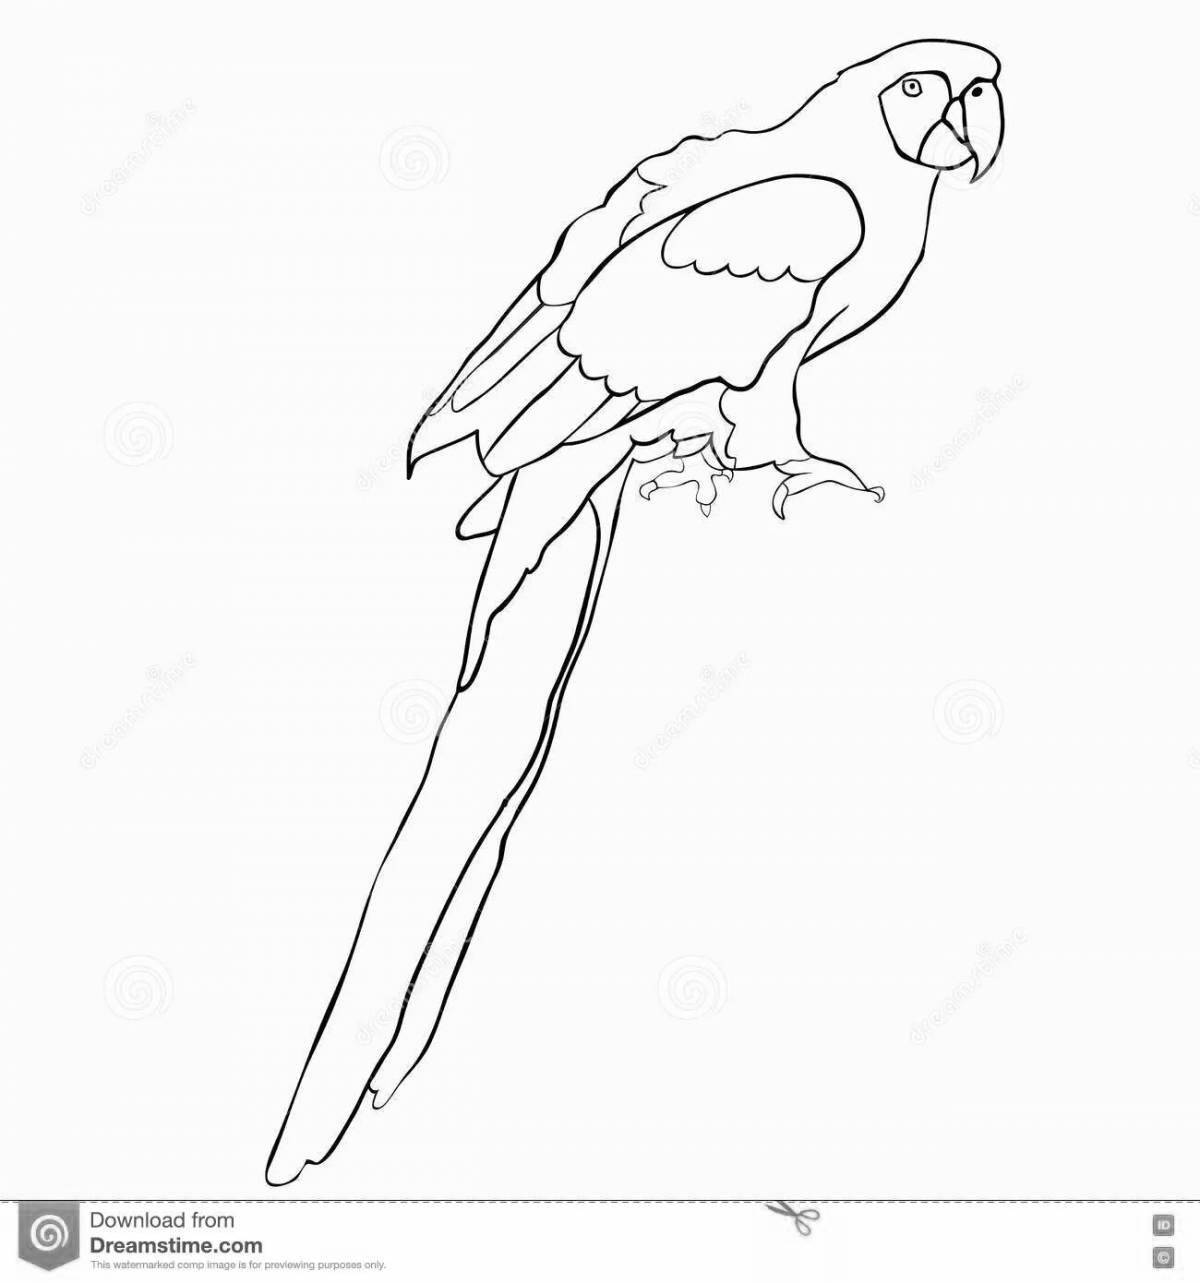 Elegant macaw coloring book for kids